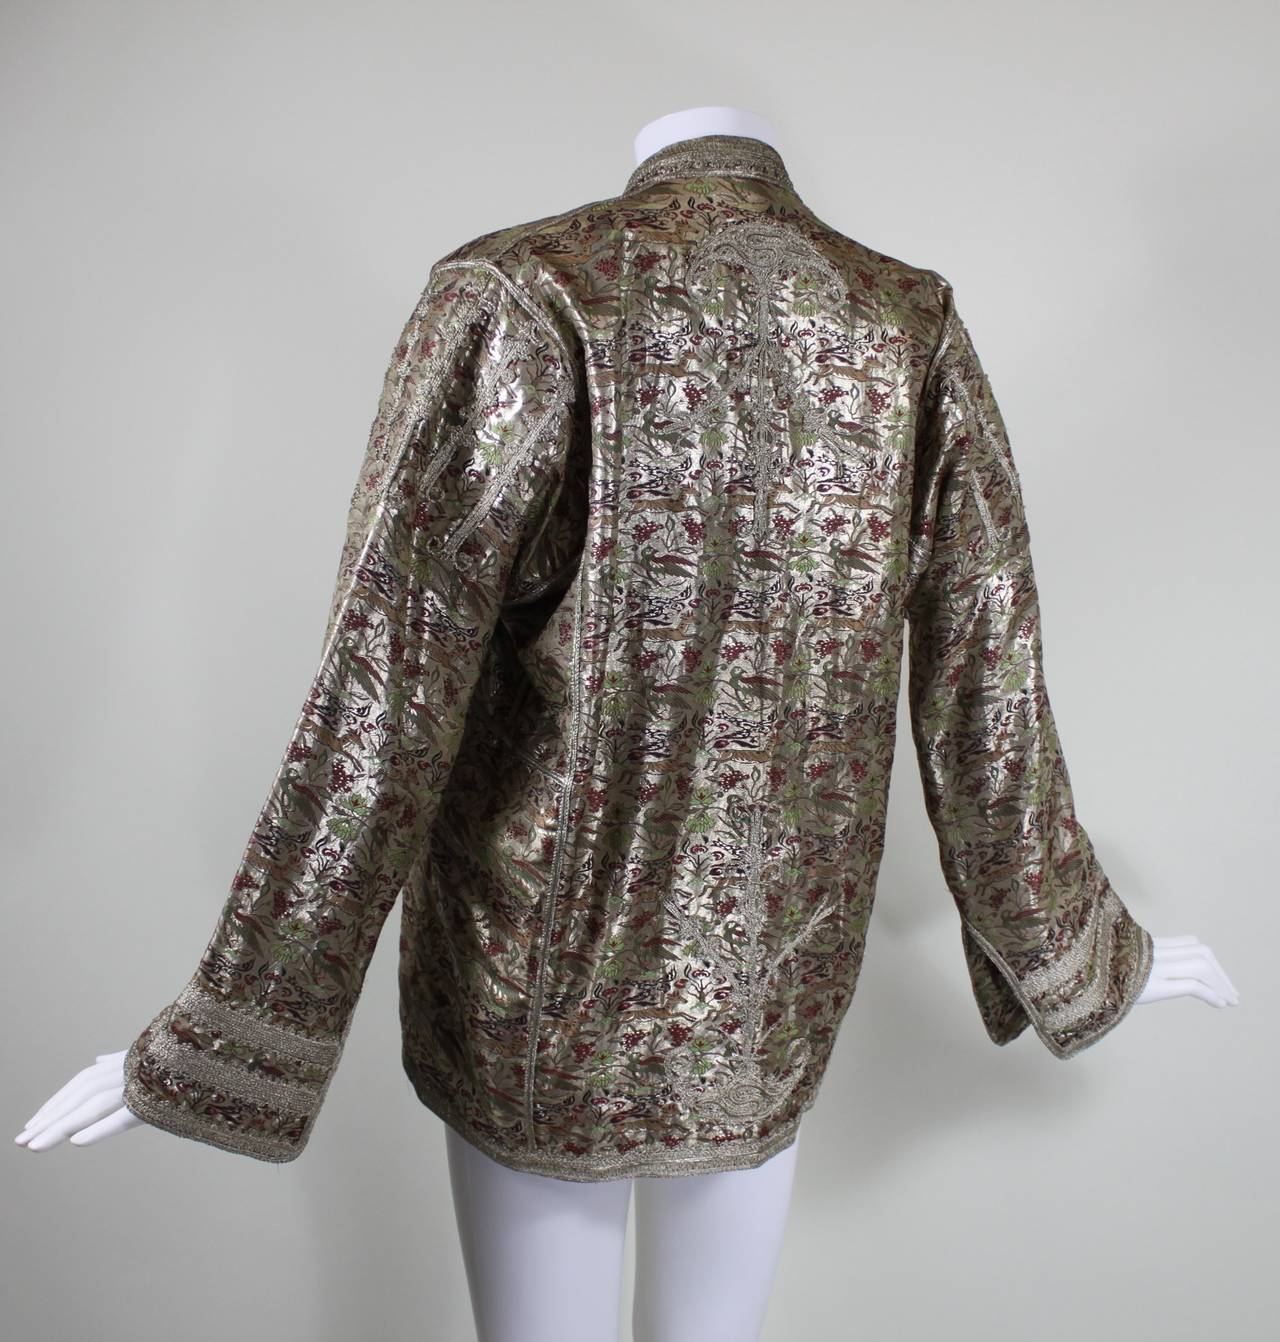 Women's 1930s Silver Lamé Jacket with Metallic Embroidered Colorful Animal Motif